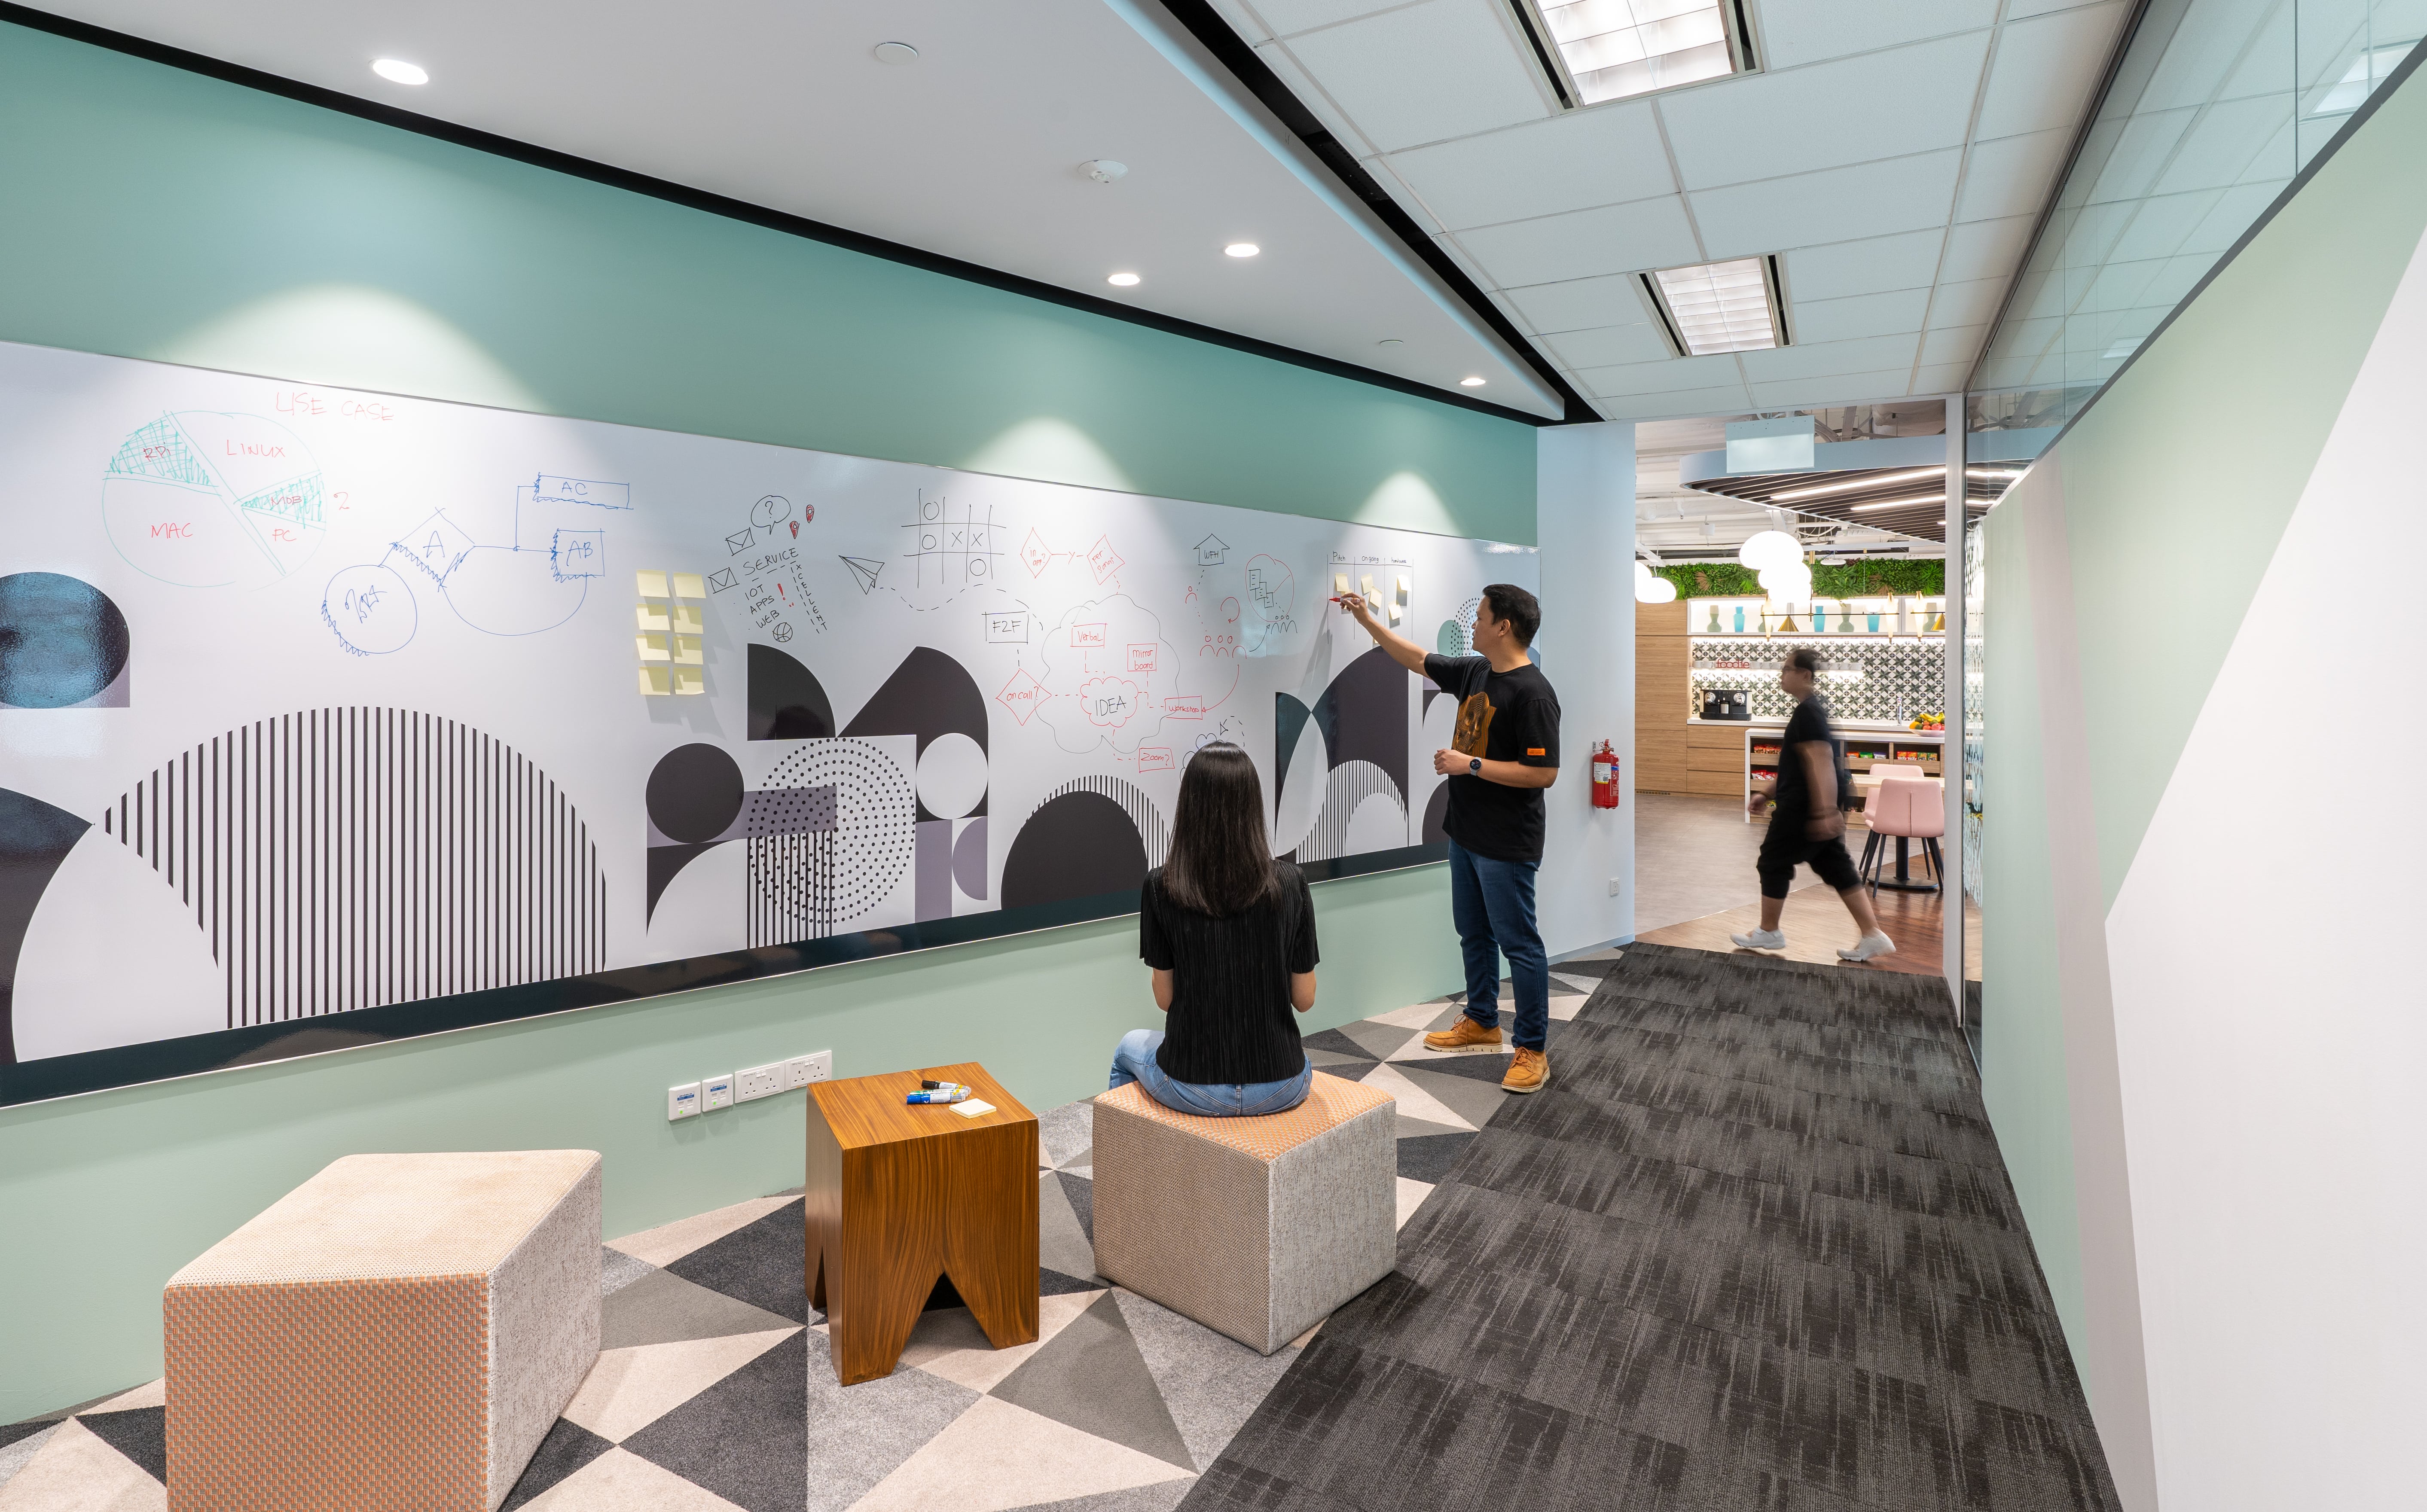 Space Matrix designed human moments into the workplace for an international tech firm in Singapore